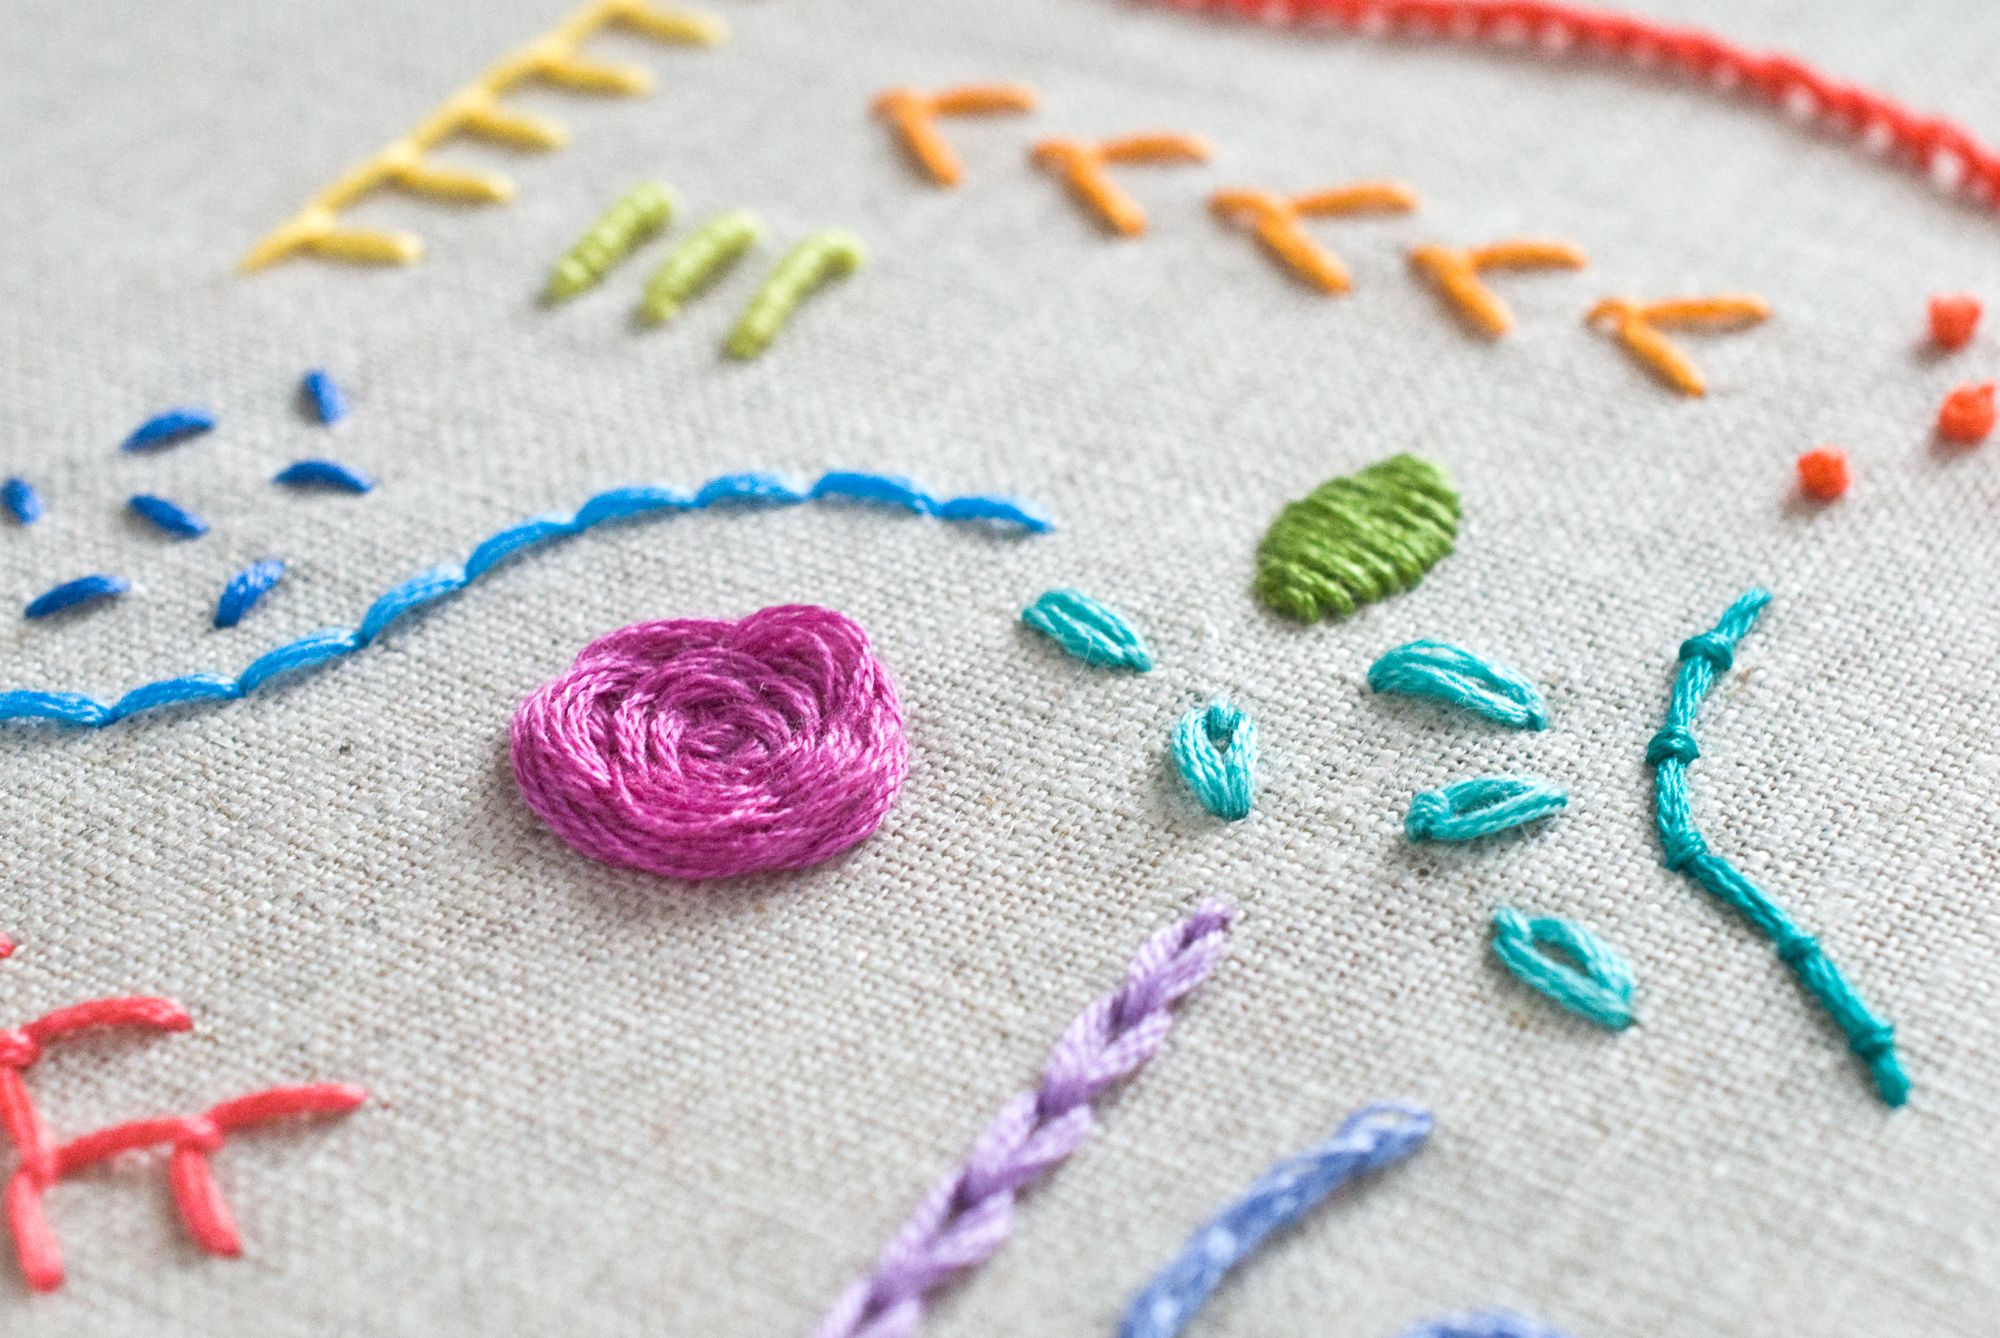 How to Design Your Own Embroidery Sampler